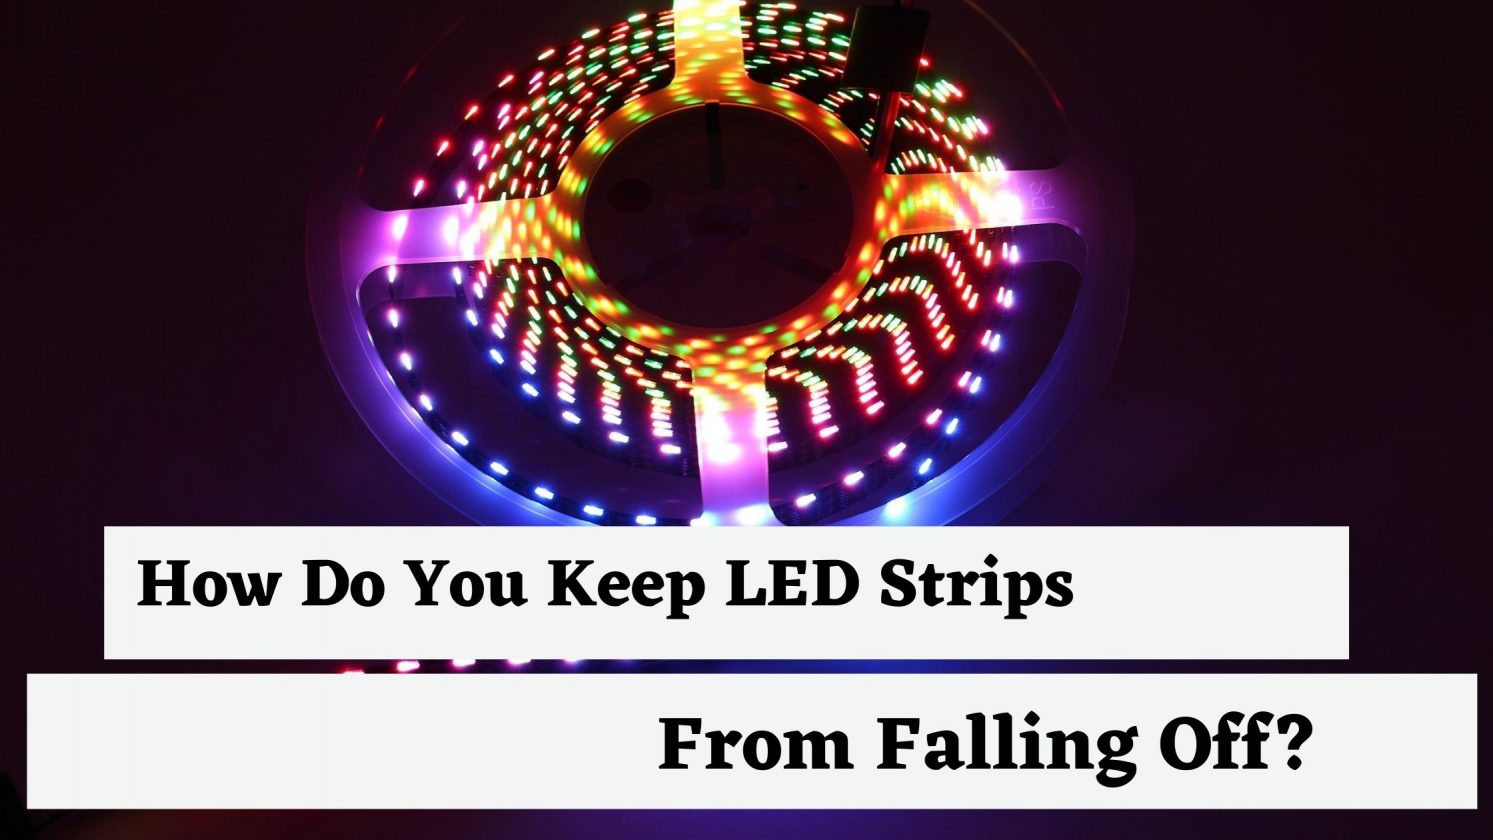 How Do You Keep LED Strips From Falling Off?